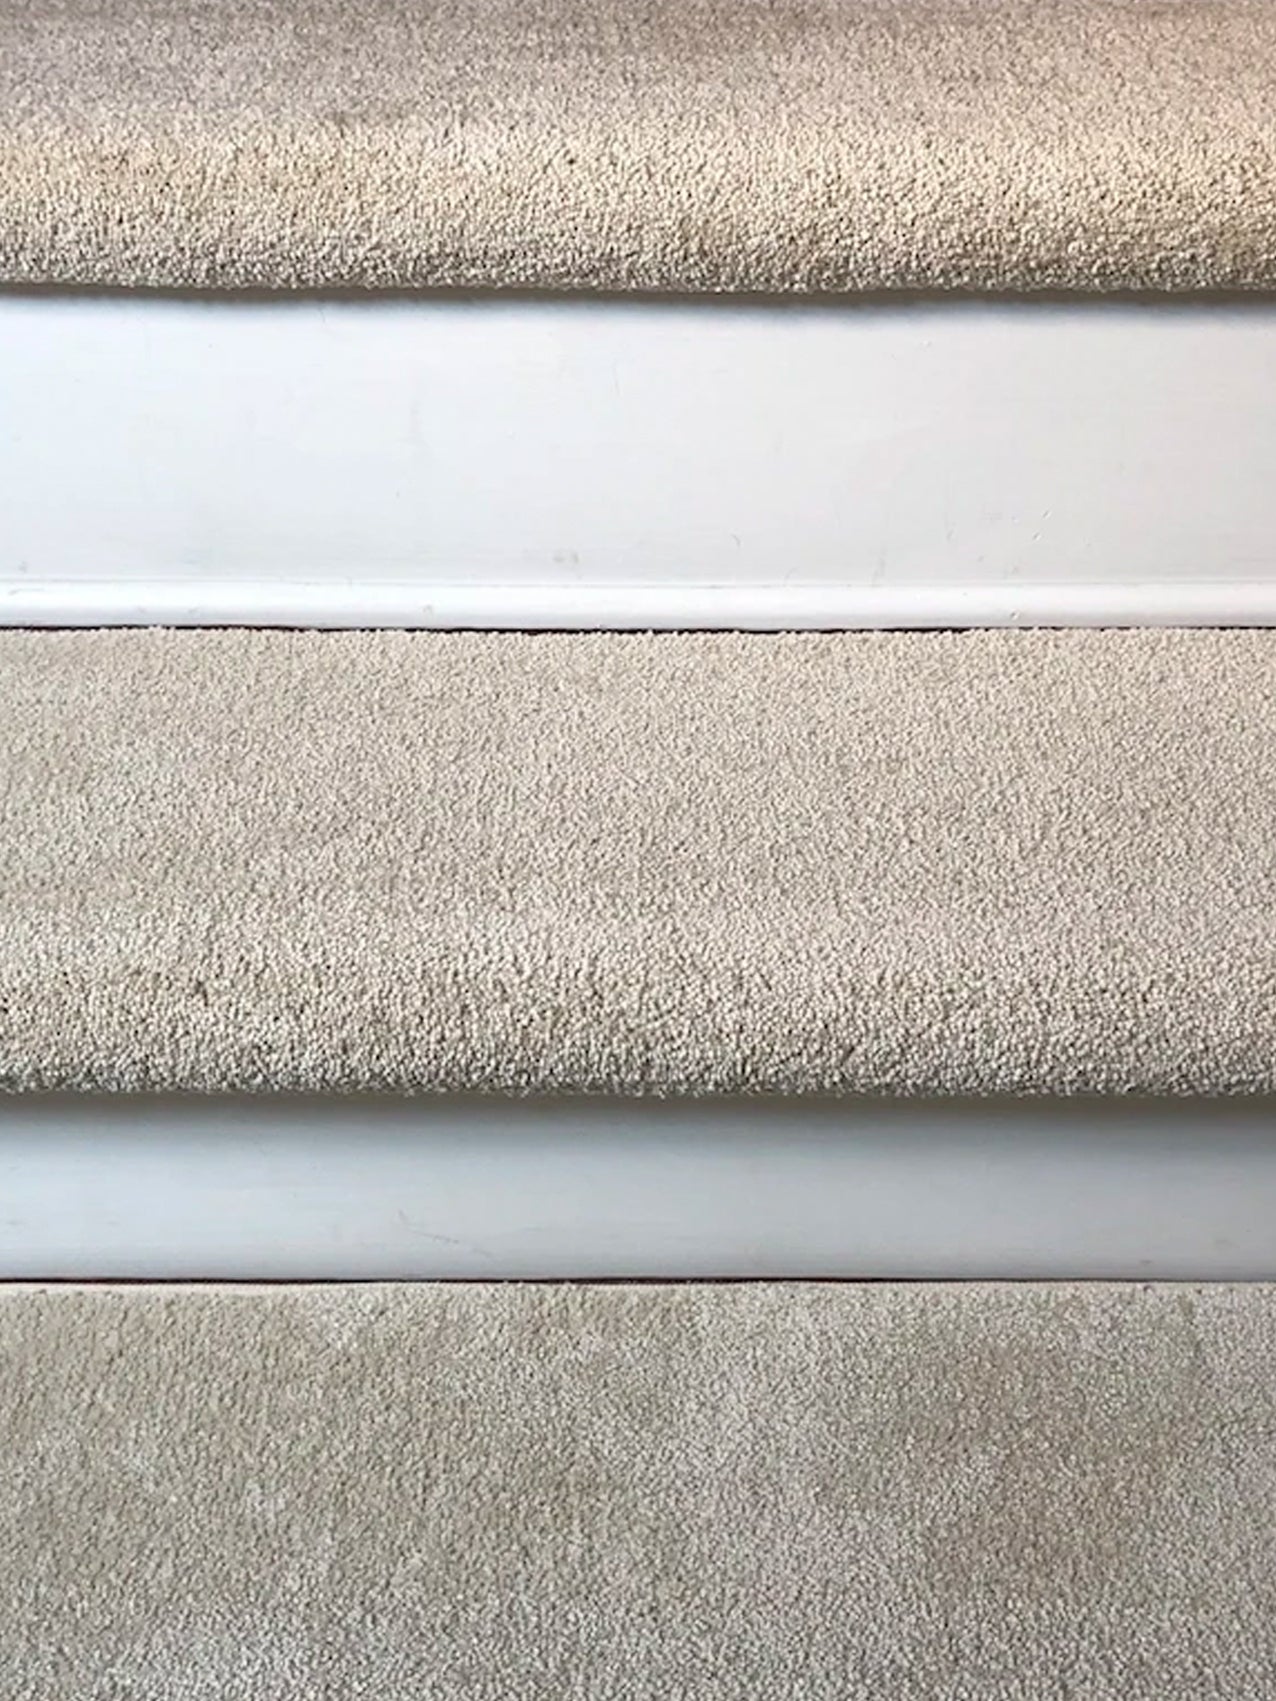 Stair Treads Carpet Set of 13 Taupe Marl Heather Border Texture